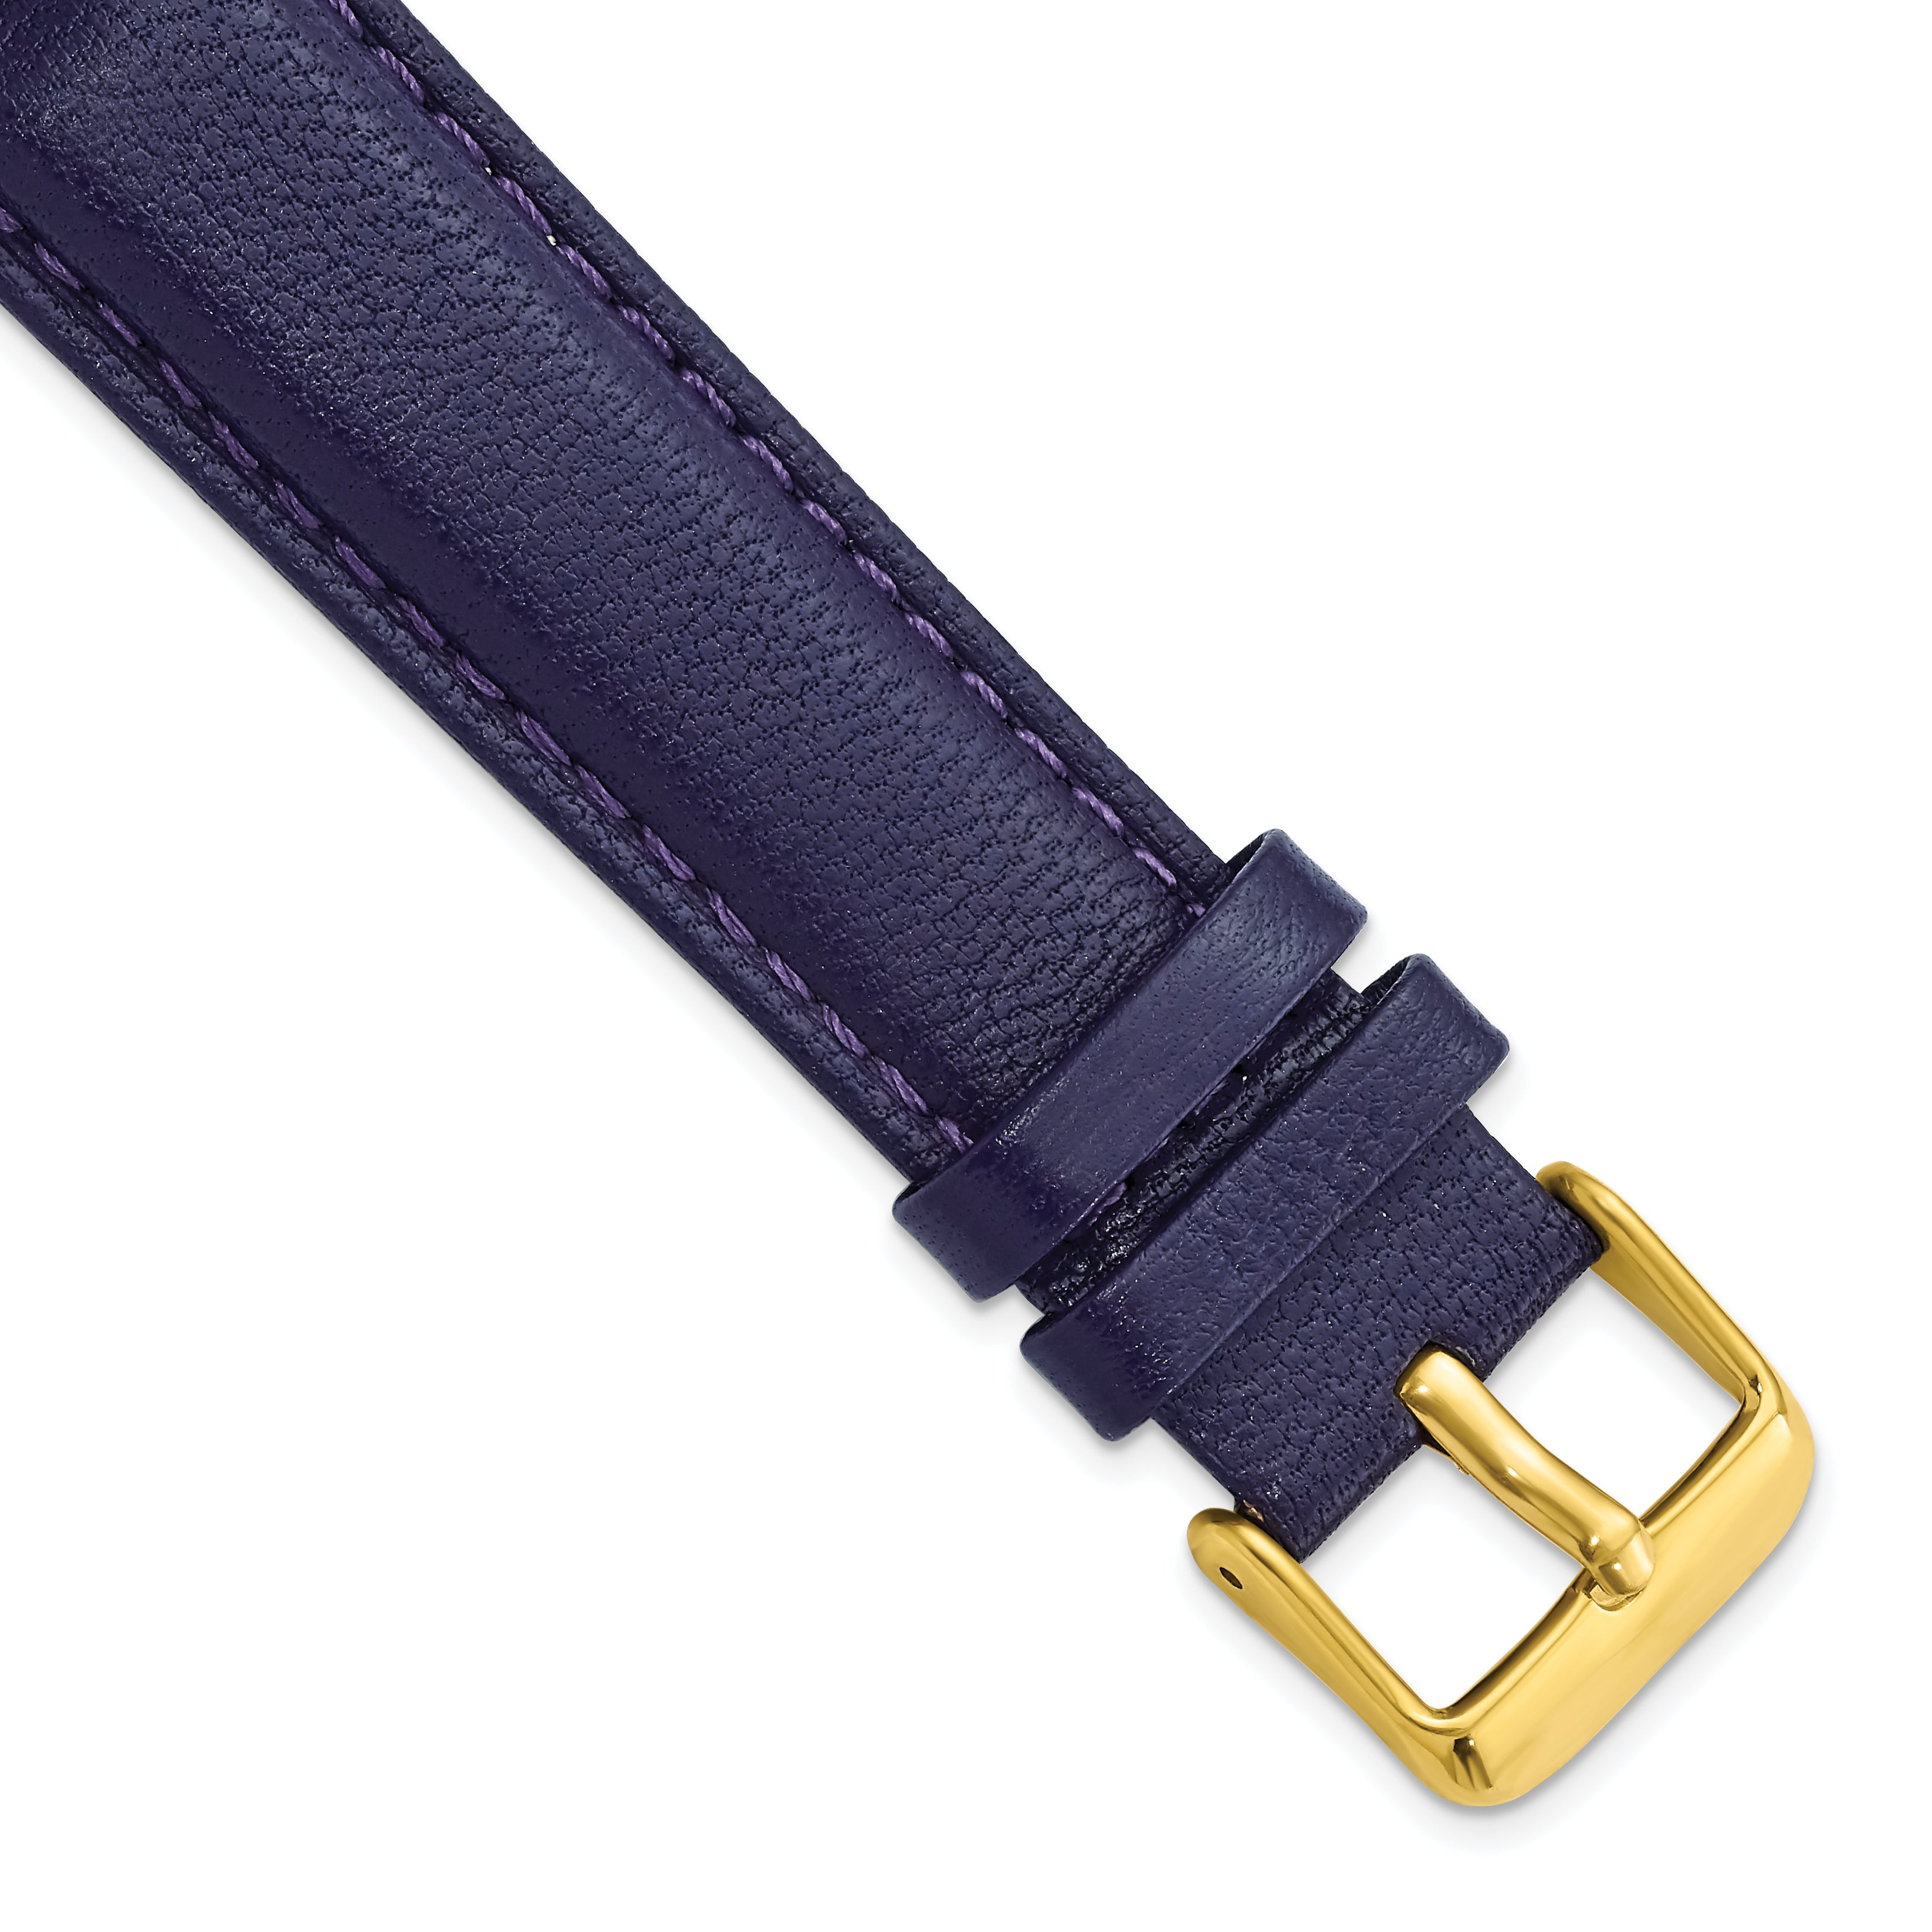 DeBeer 20mm Navy Glove Leather with Gold-tone Panerai Style Buckle 7.75 inch Watch Band